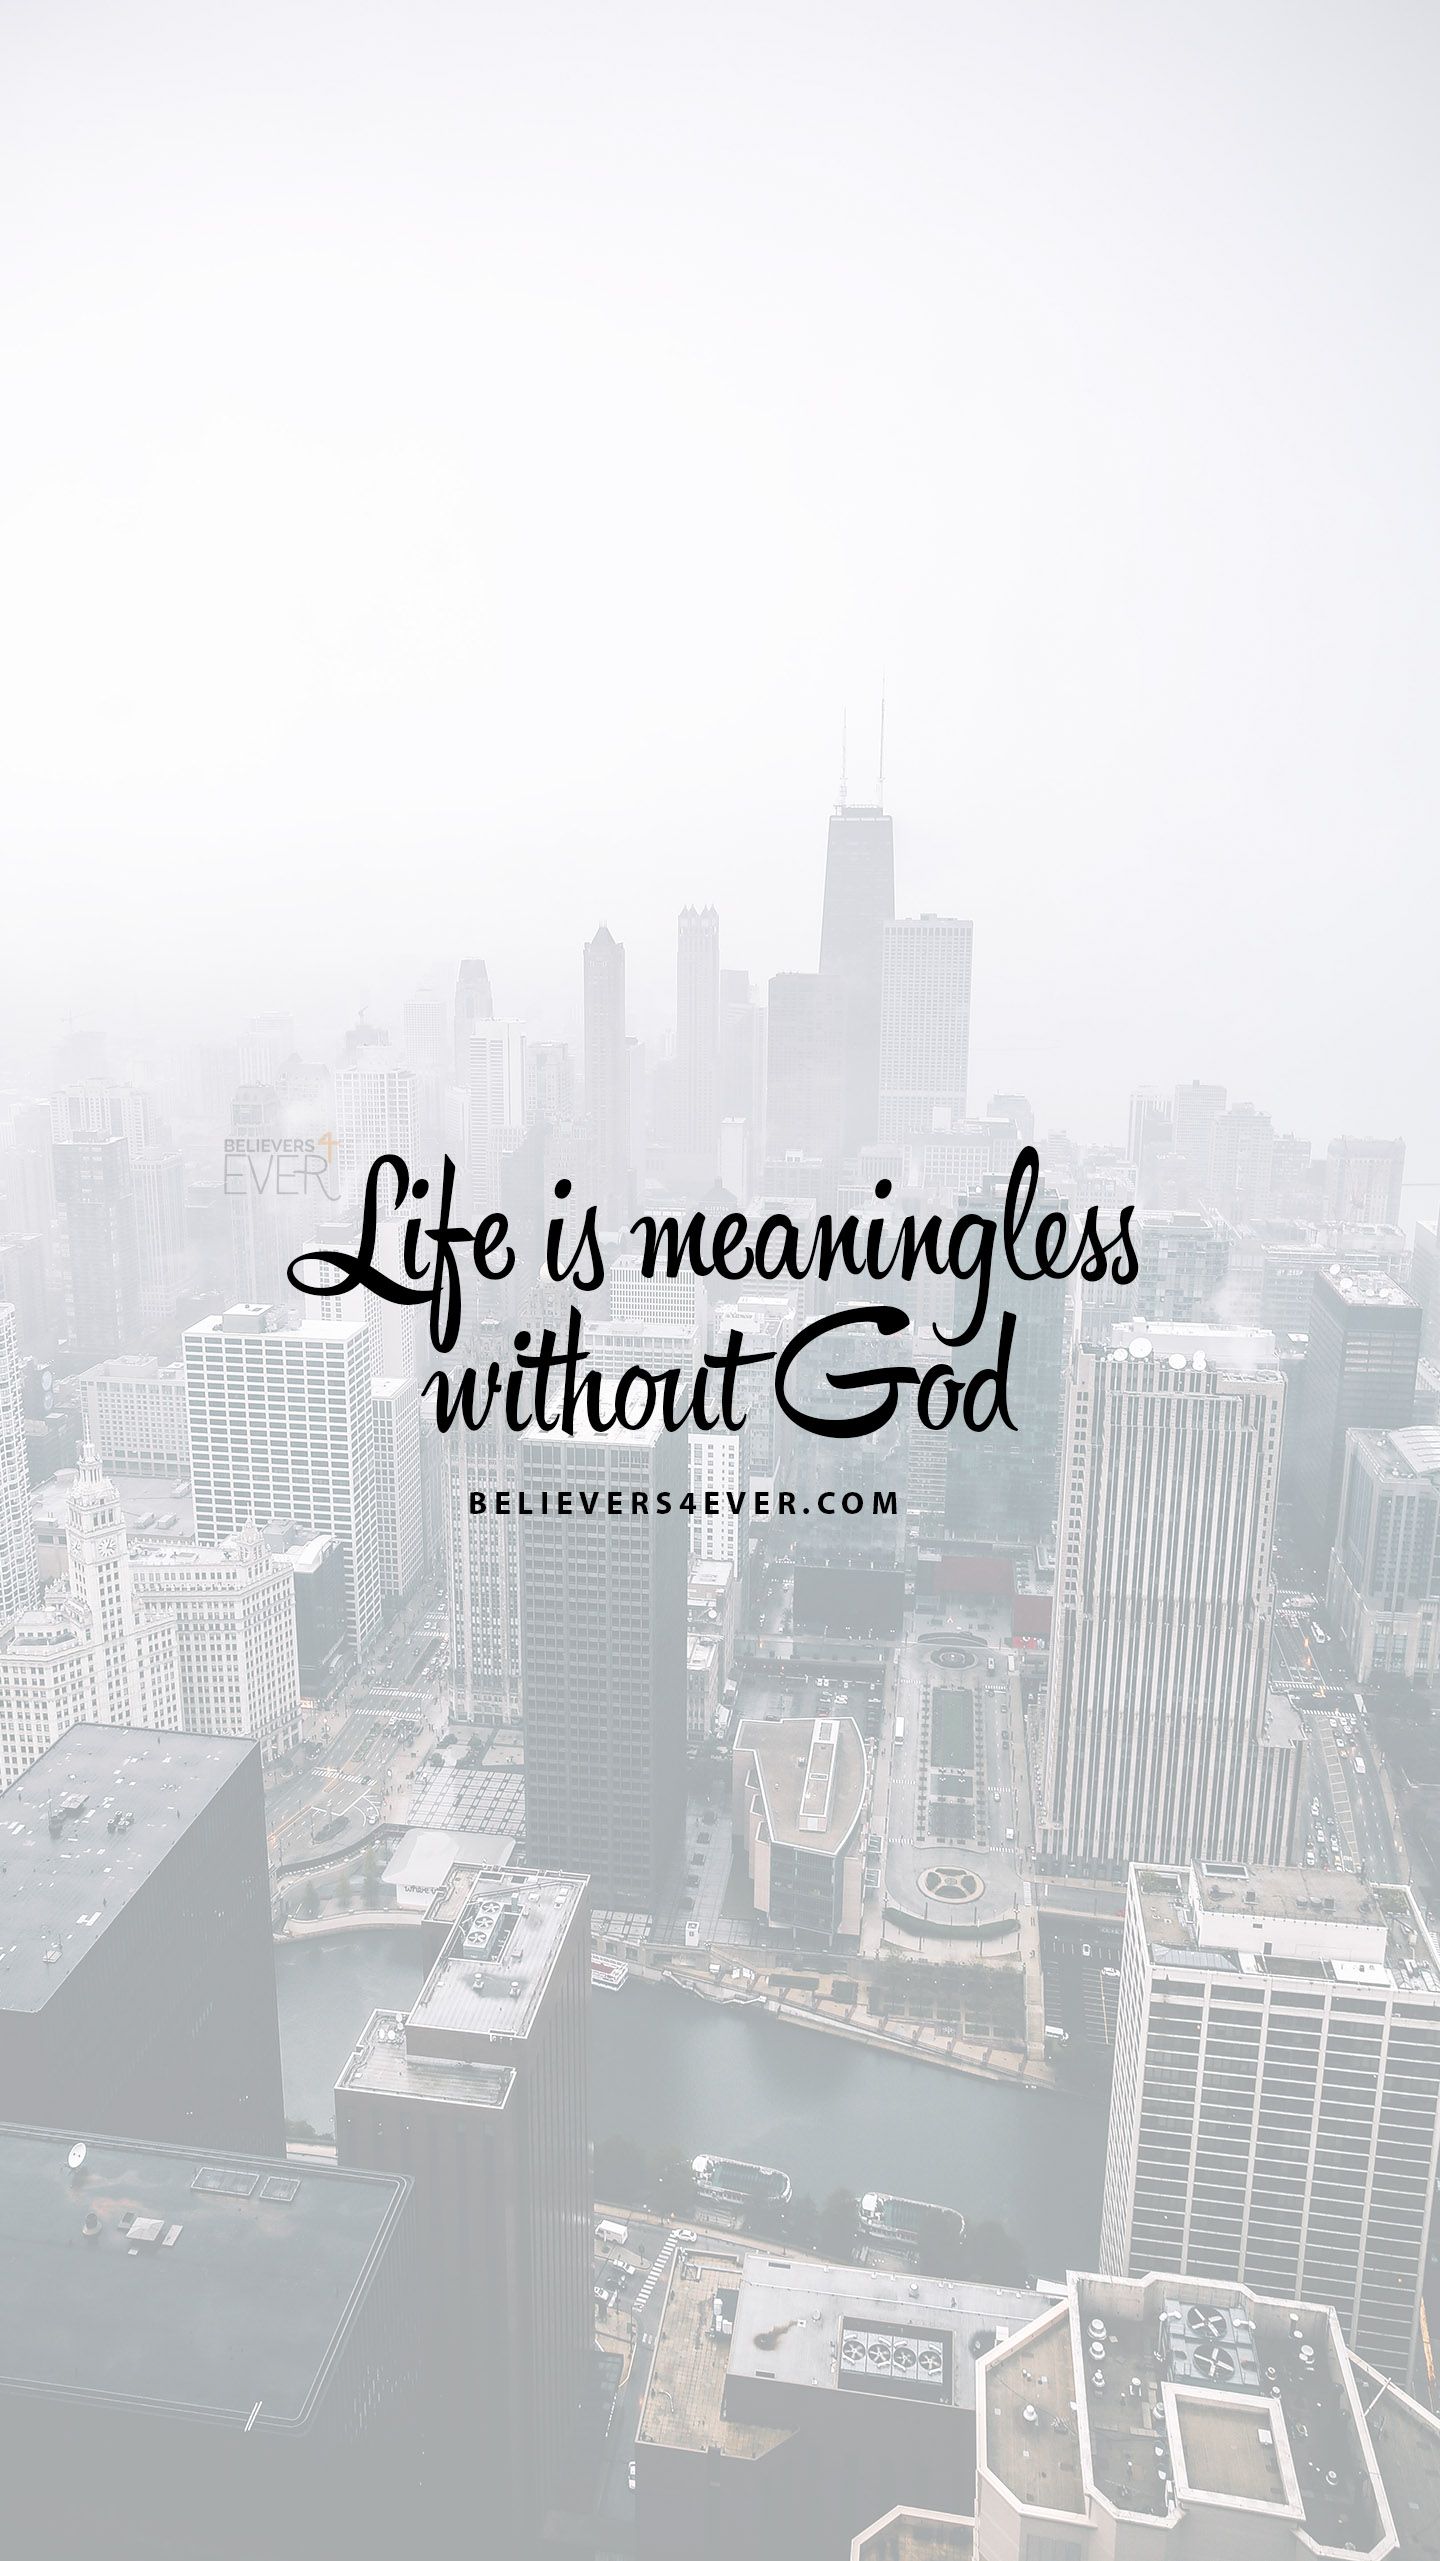 Life is meaningless without God. iPhone wallpaper quotes bible, Bible quotes, Quotes about god